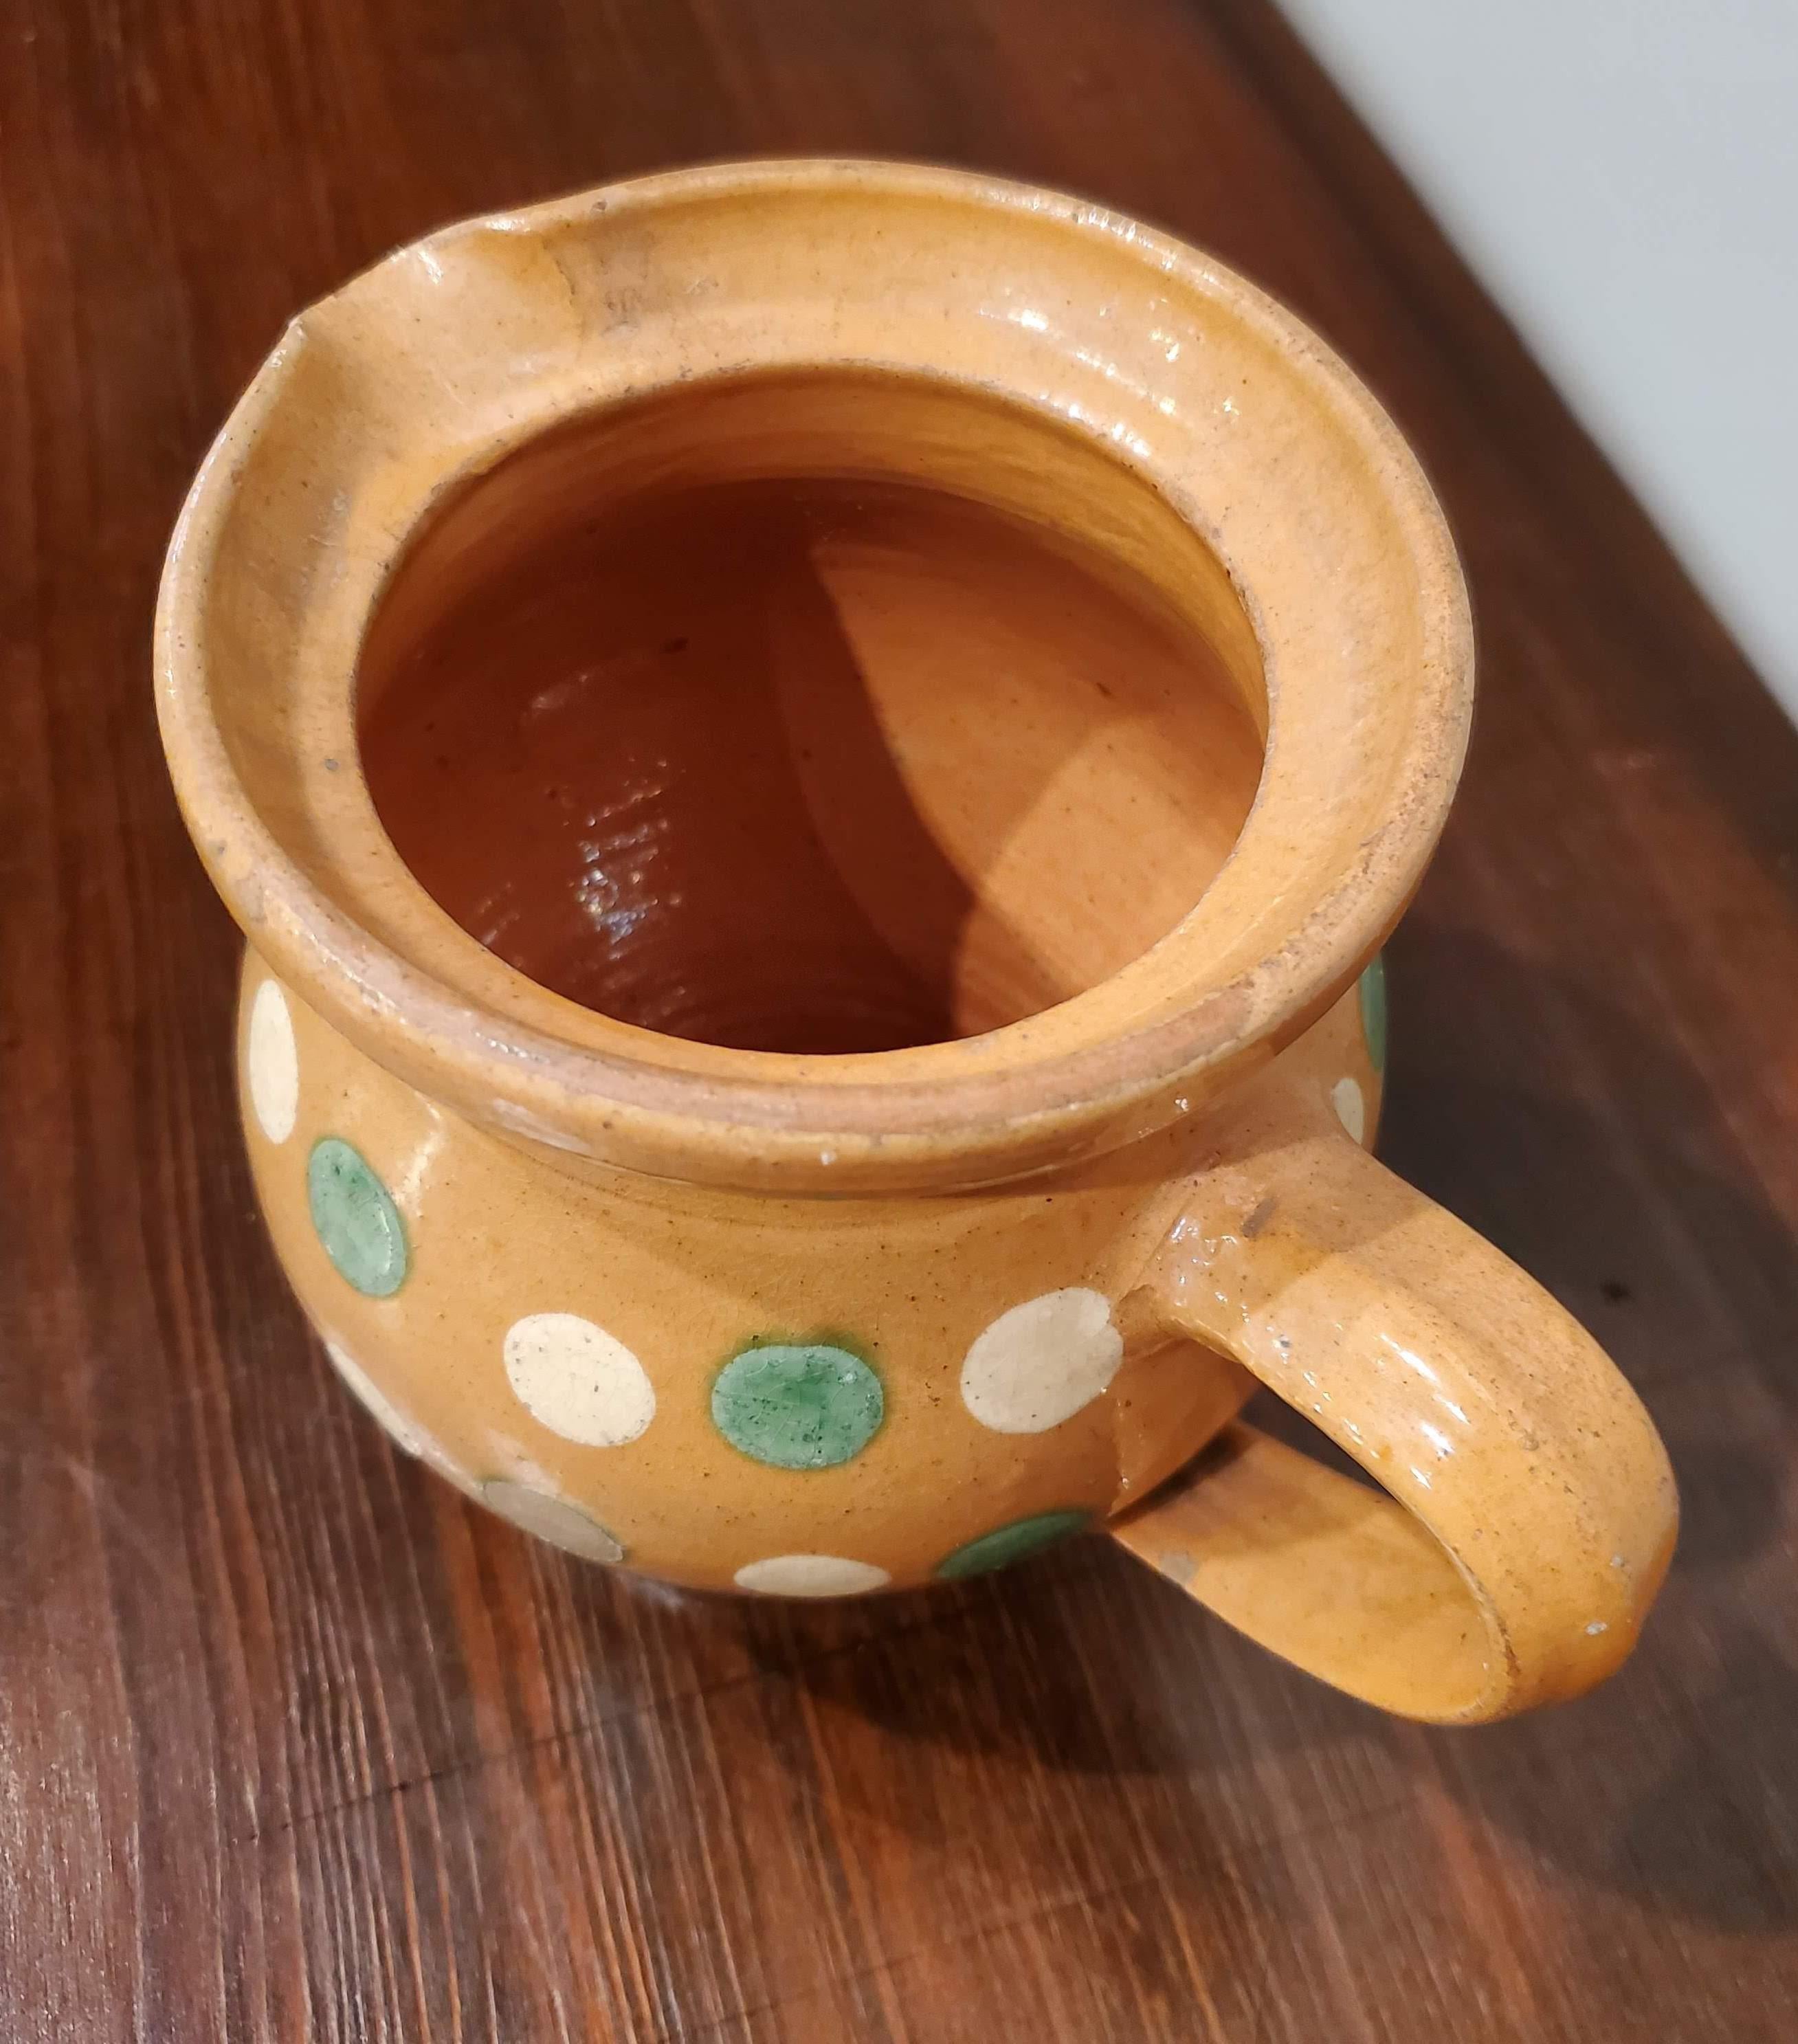 19th Century French Provincial Terracotta Milk Pitcher with Green and Cream Polka Dots